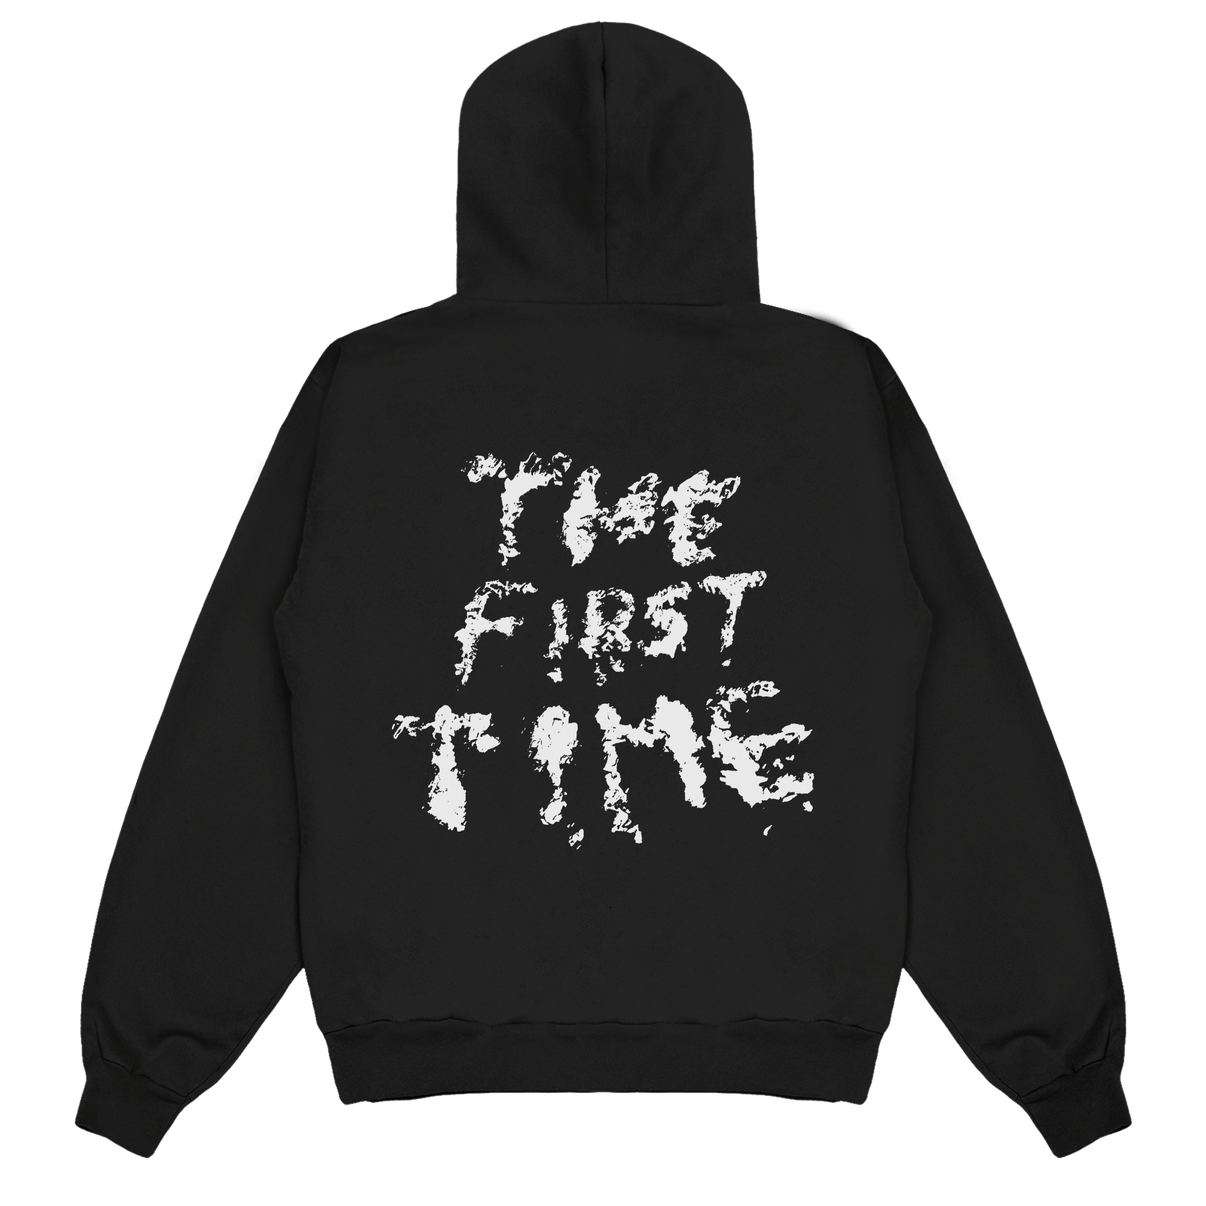 The First Time Band-Aid Hoodie | Official The Kid LAROI – THE KID LAROI